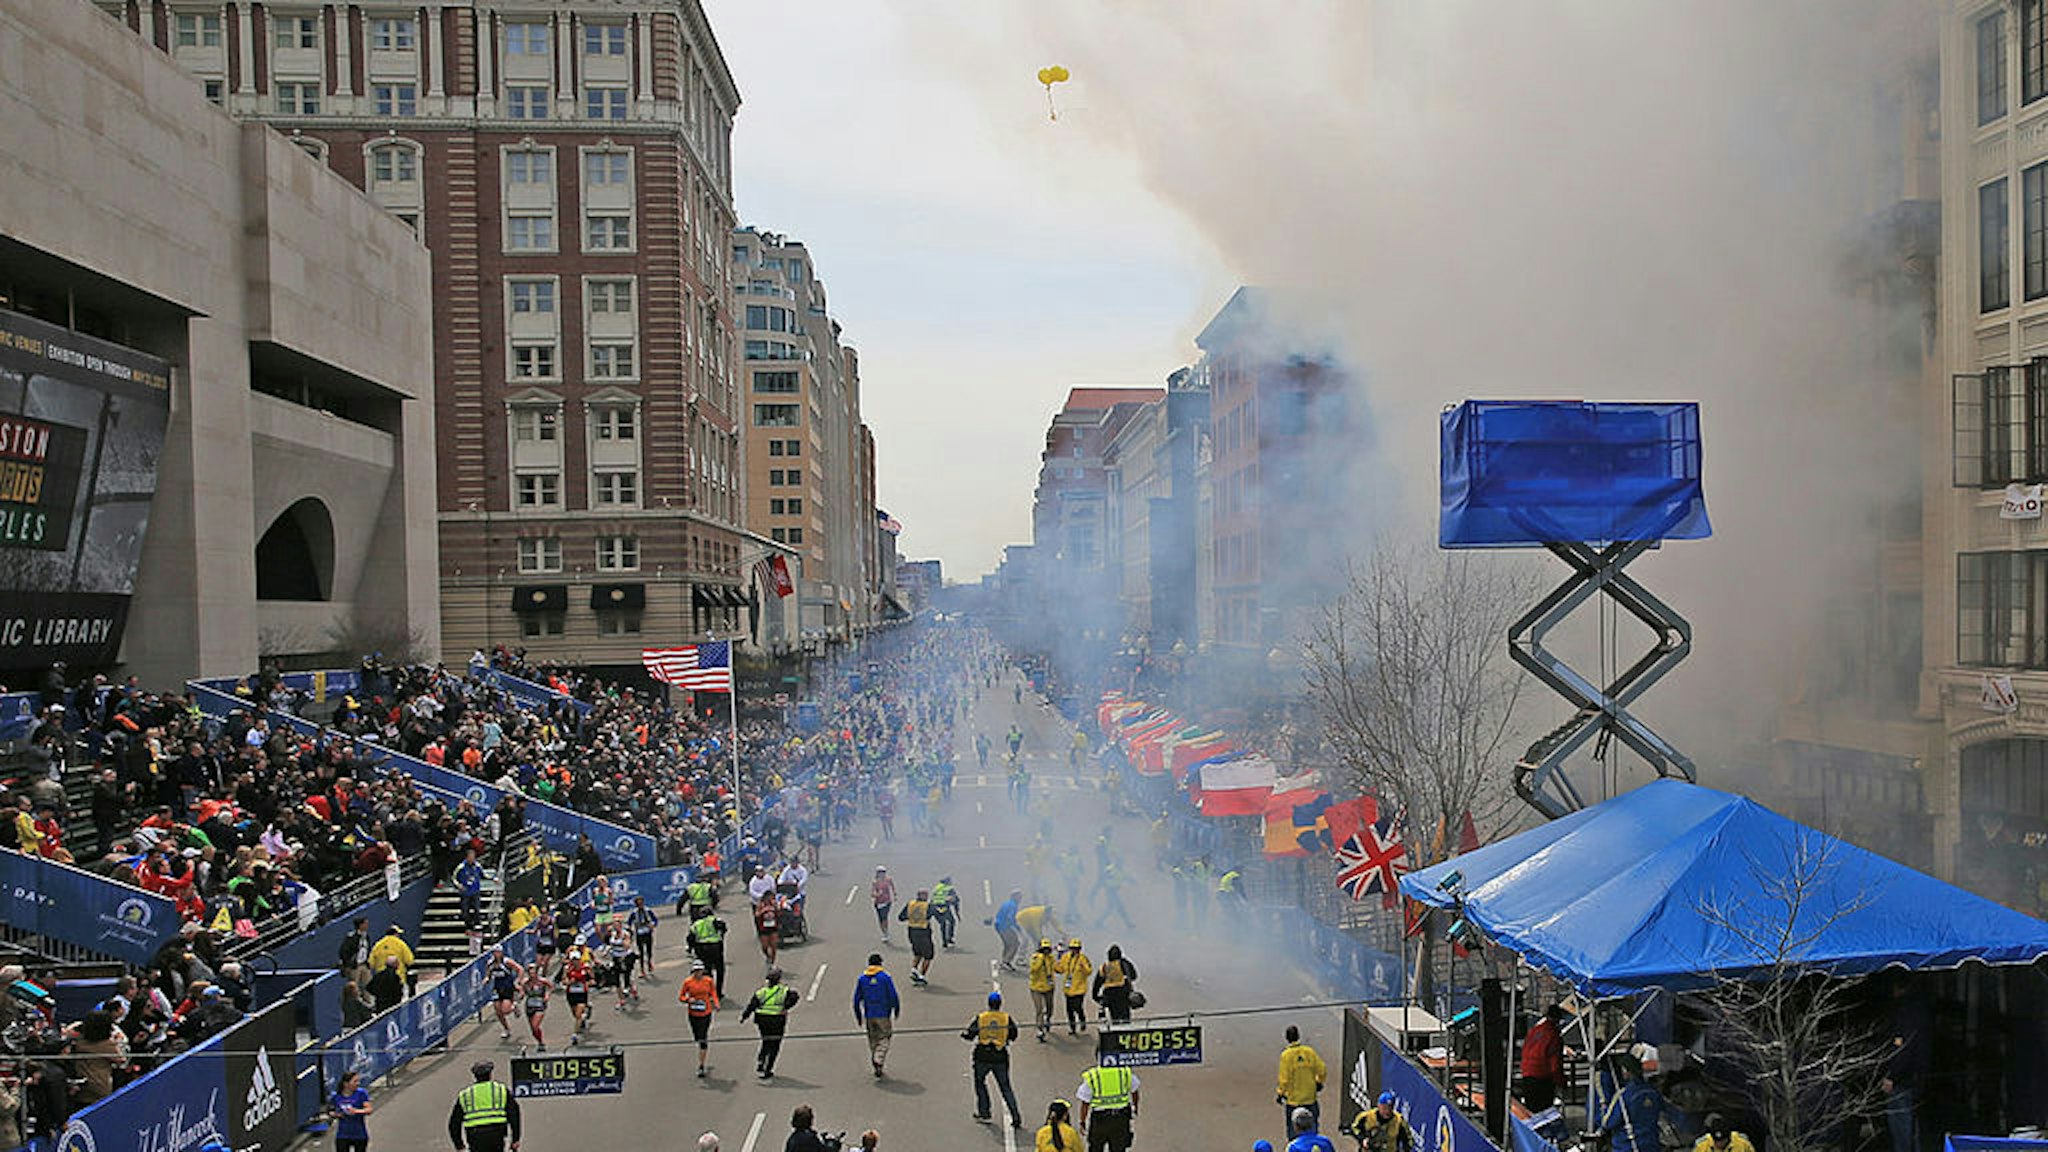 Emergency personnel respond to the scene after two explosions went off near the finish line of the 117th Boston Marathon on April 15, 2013.